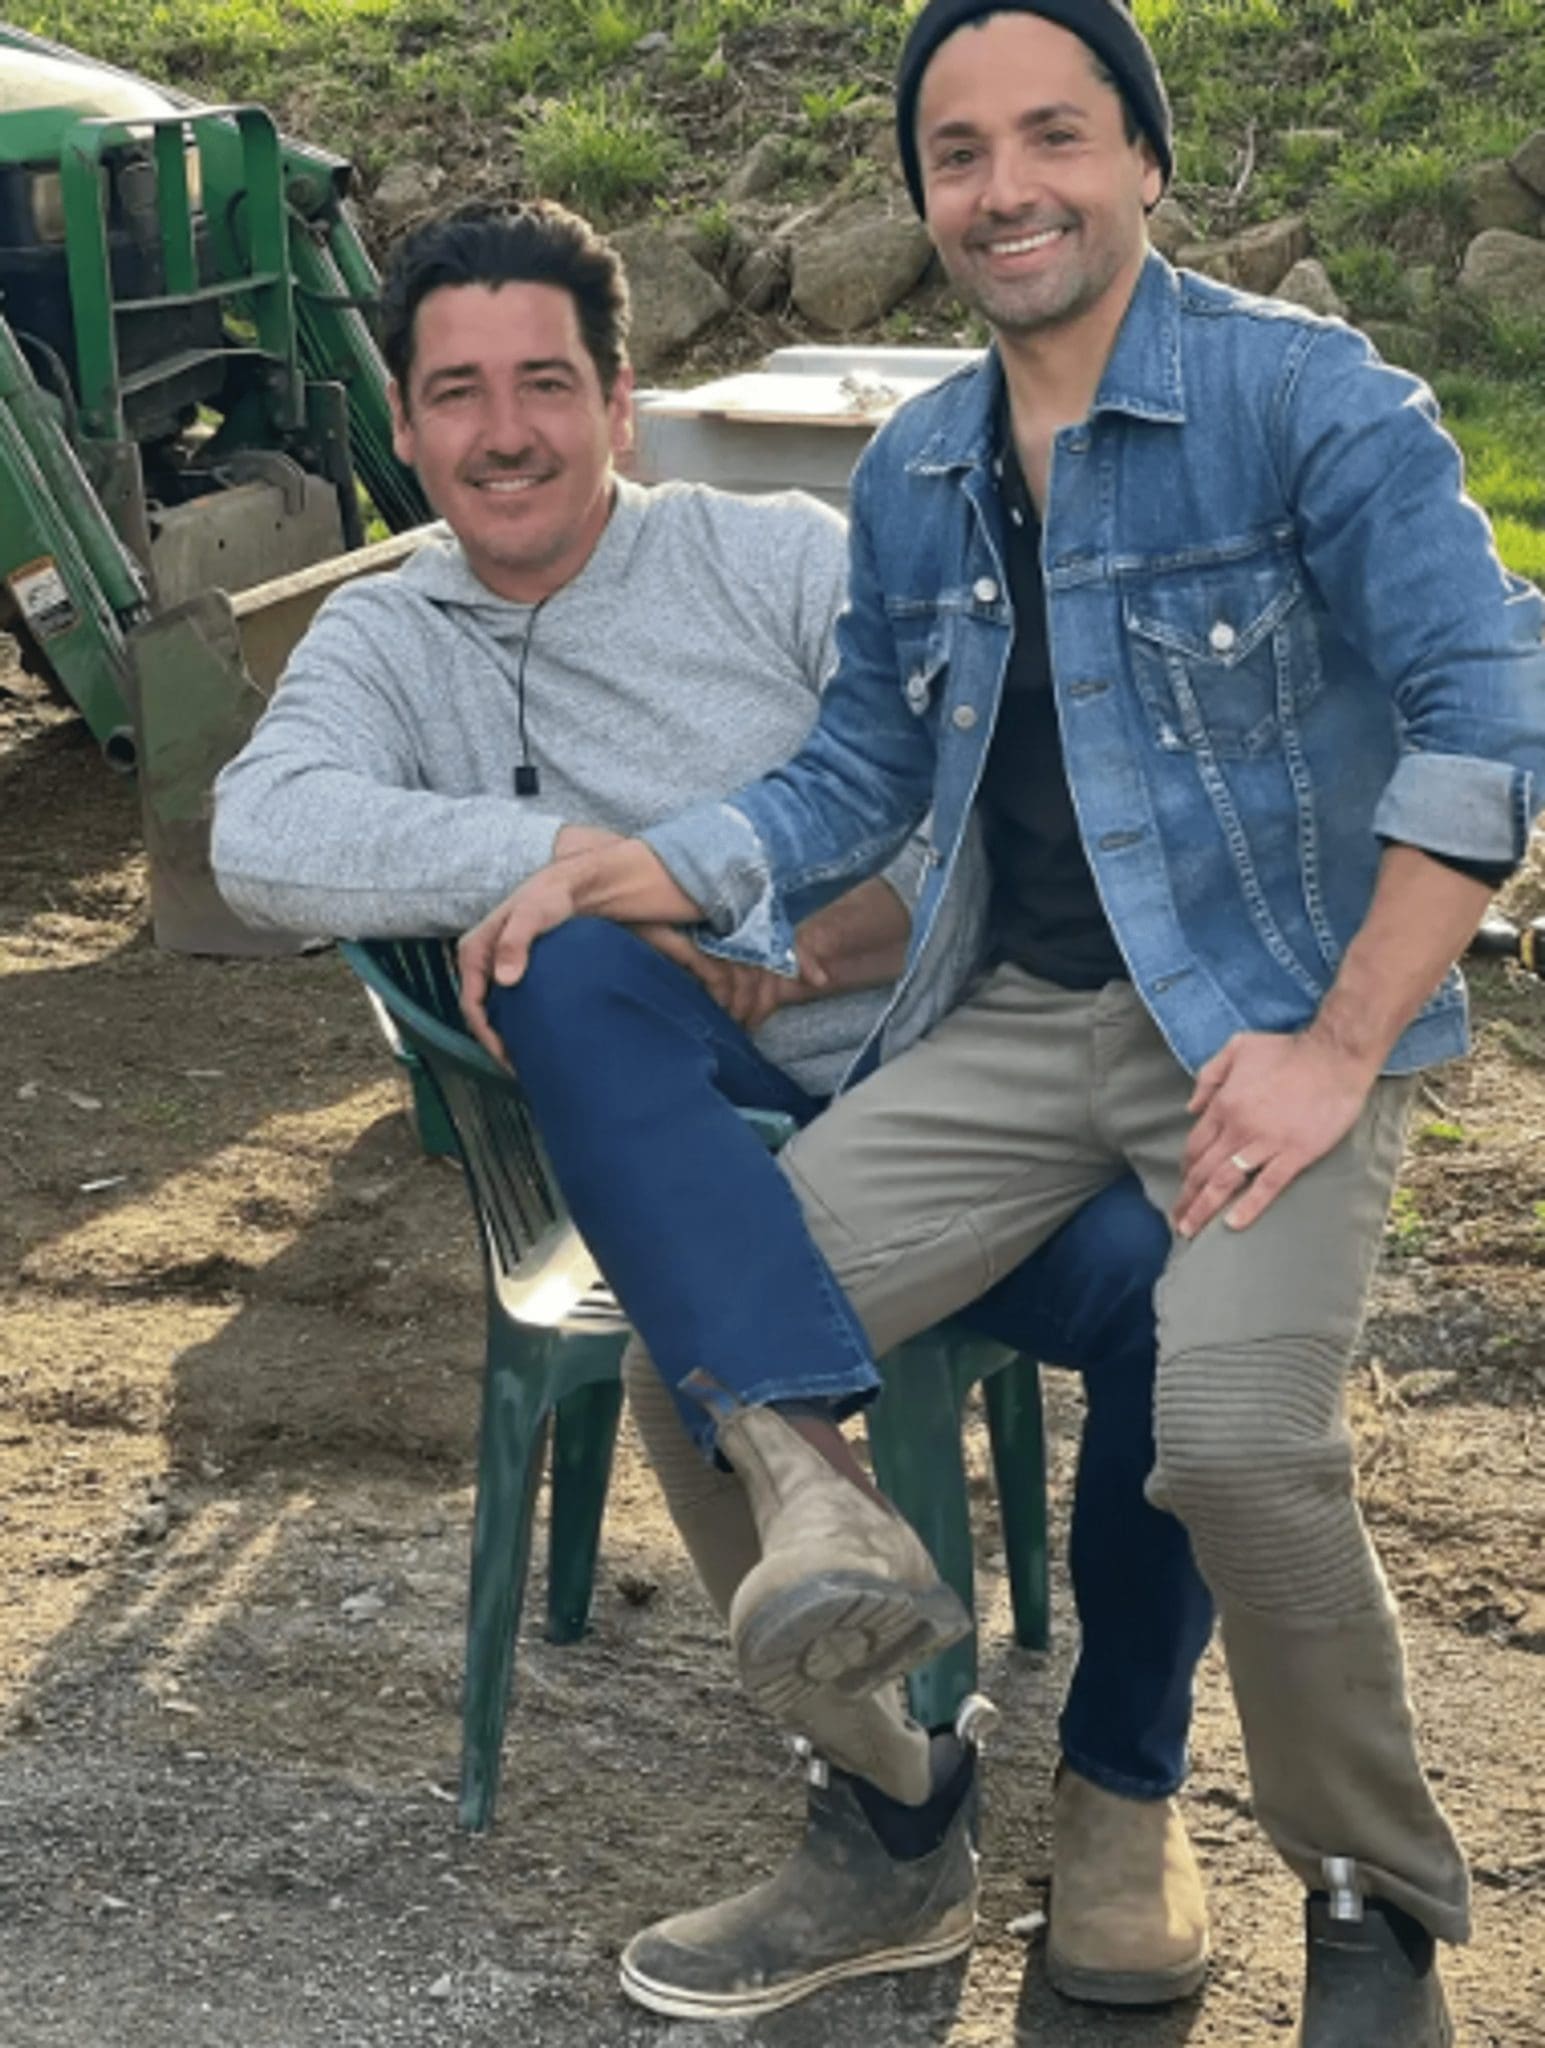 Jonathan Knight Disclosed That He Wed His Fiancée Harley Rodriguez